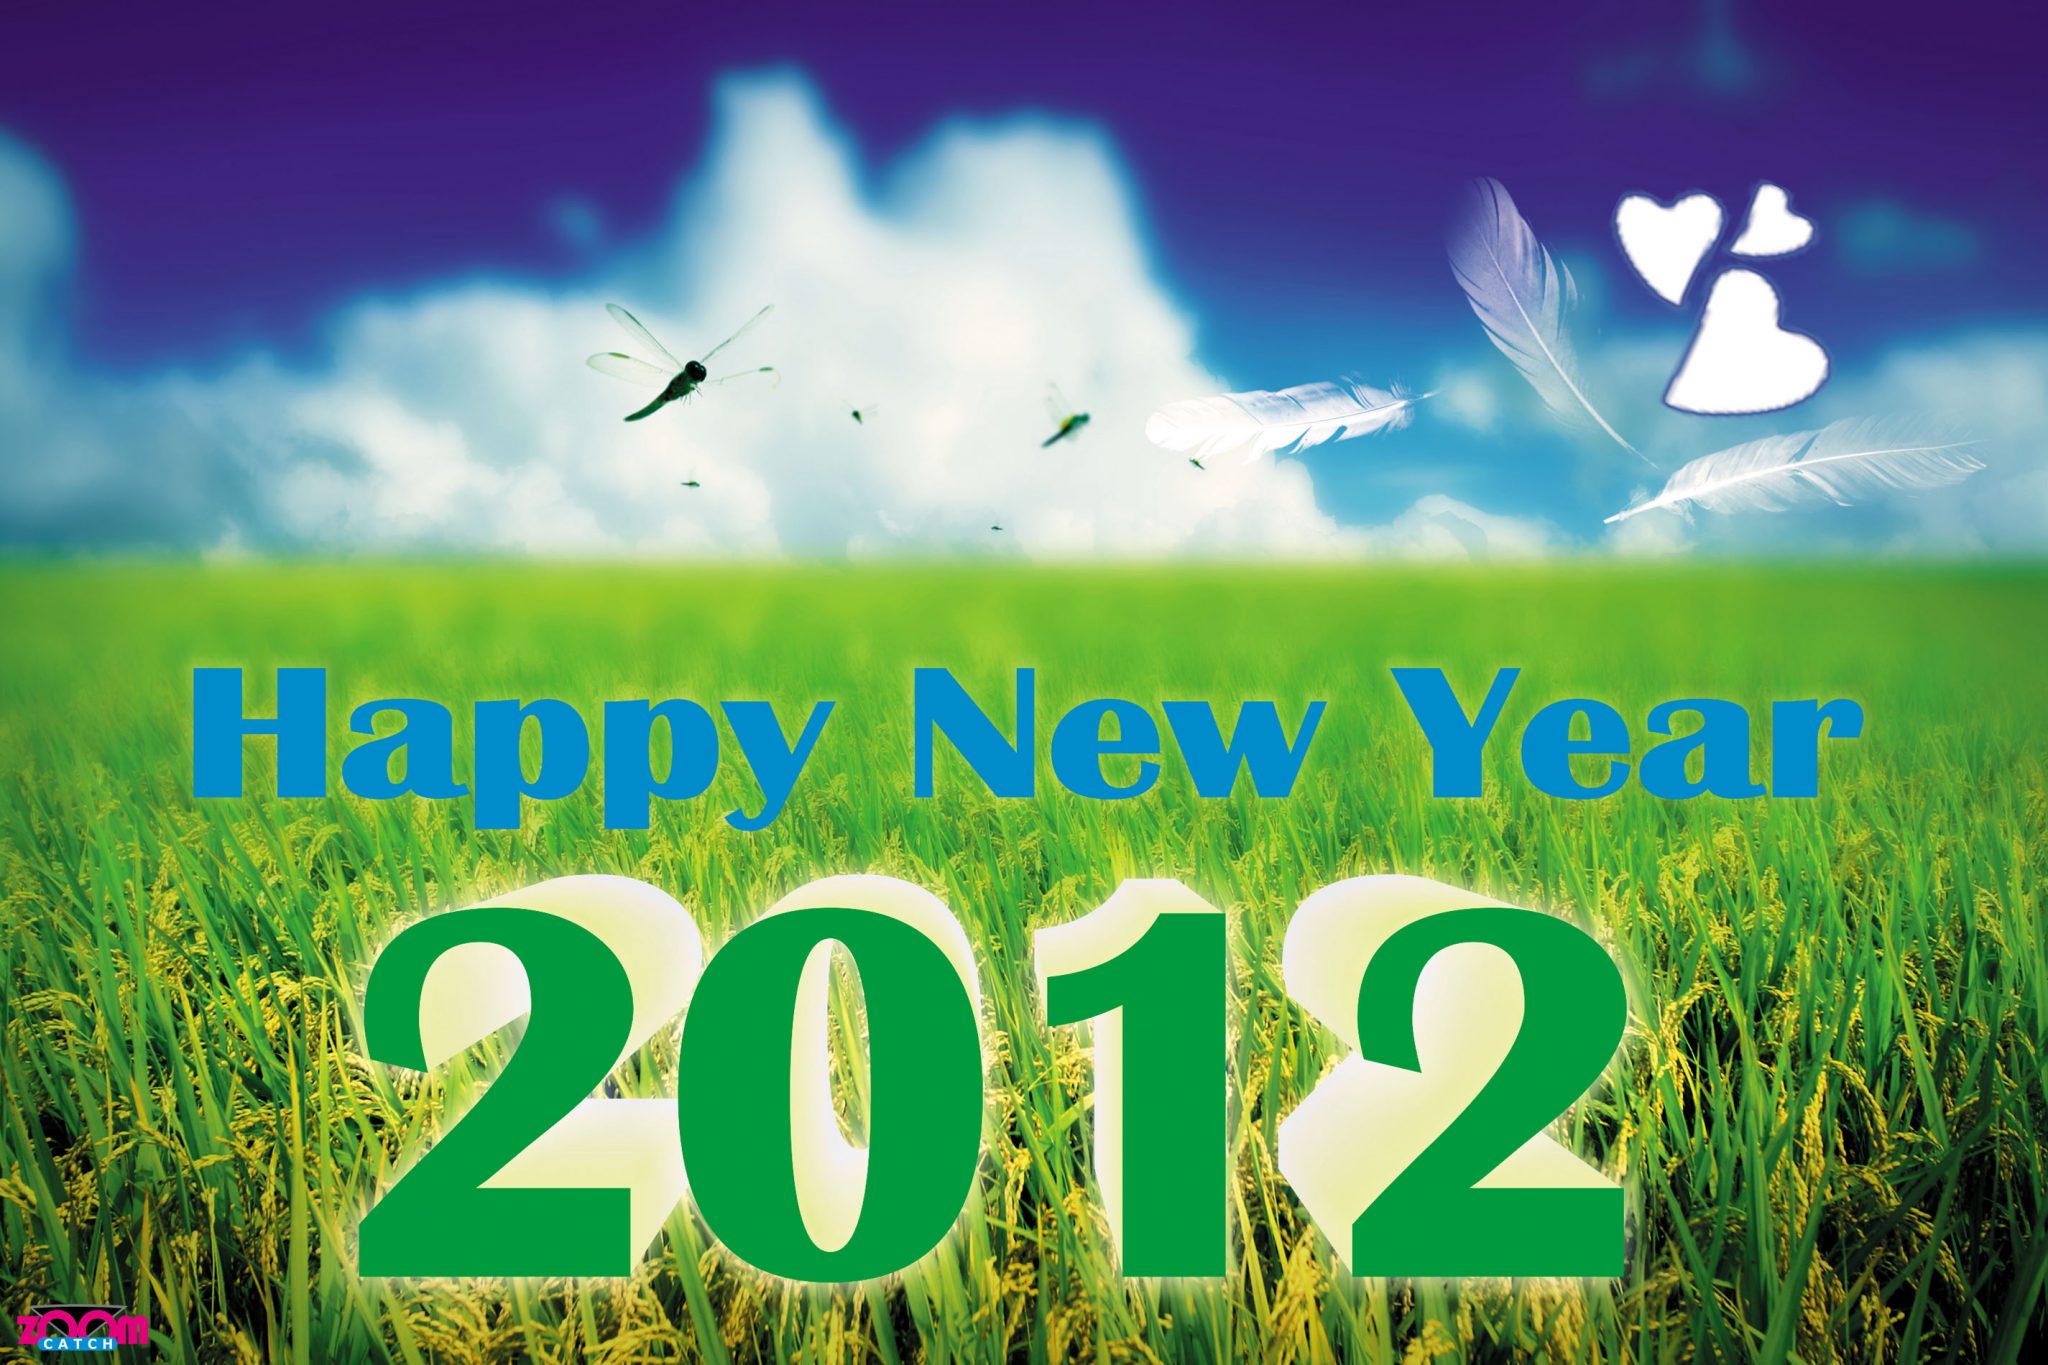 2012 Happy New Year Wallpapers - New Year 2012 Walpaper - HD Wallpaper 